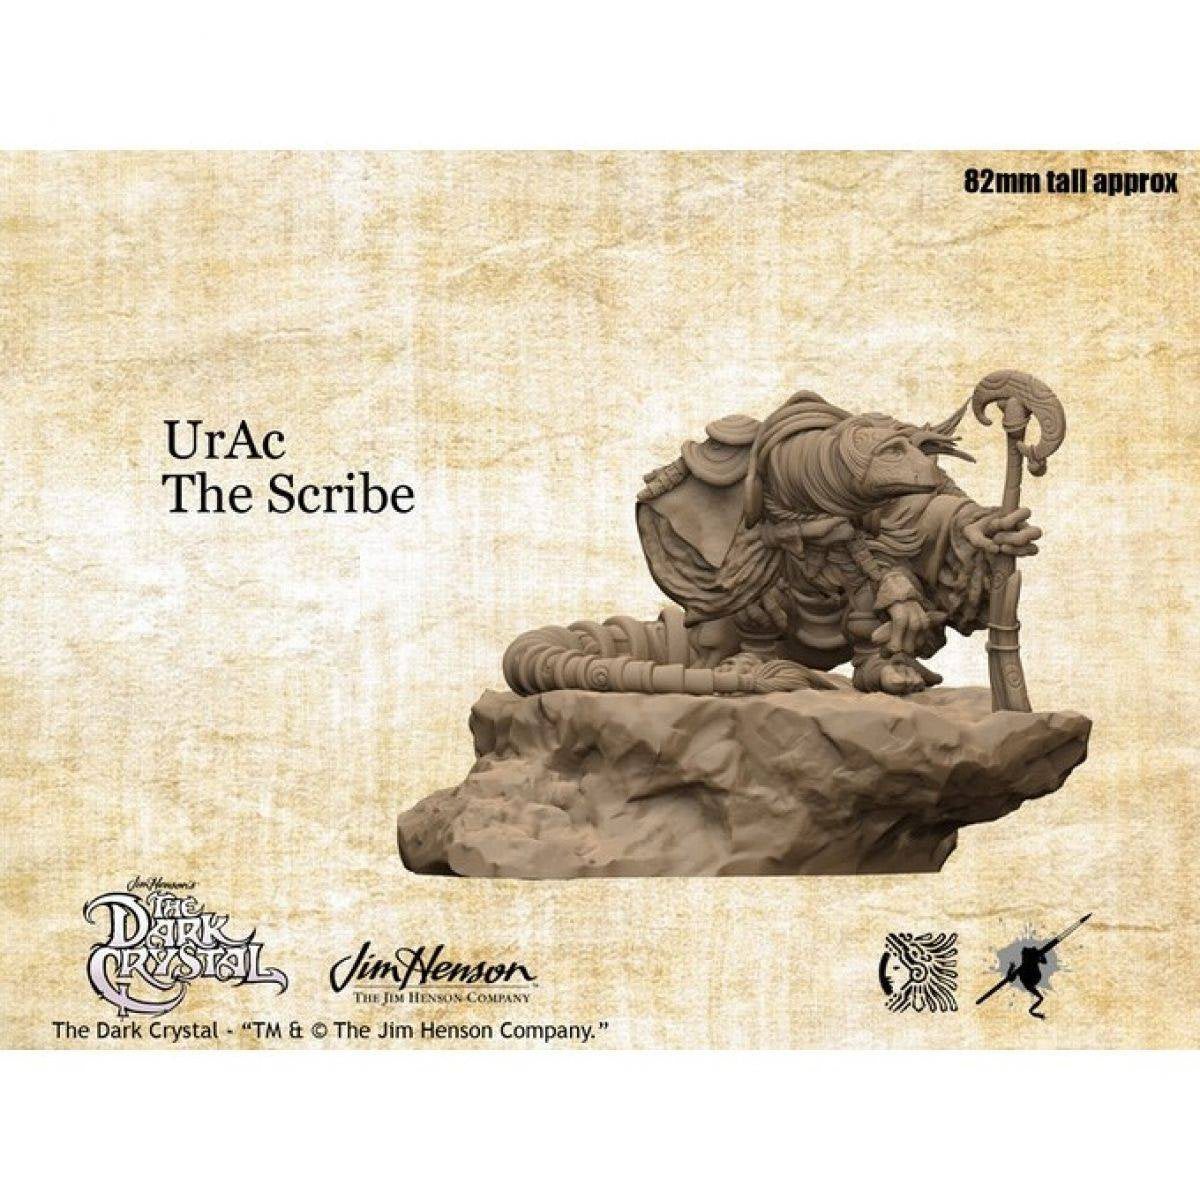 Jim Hensons Collectible Models - UrAc the Scribe